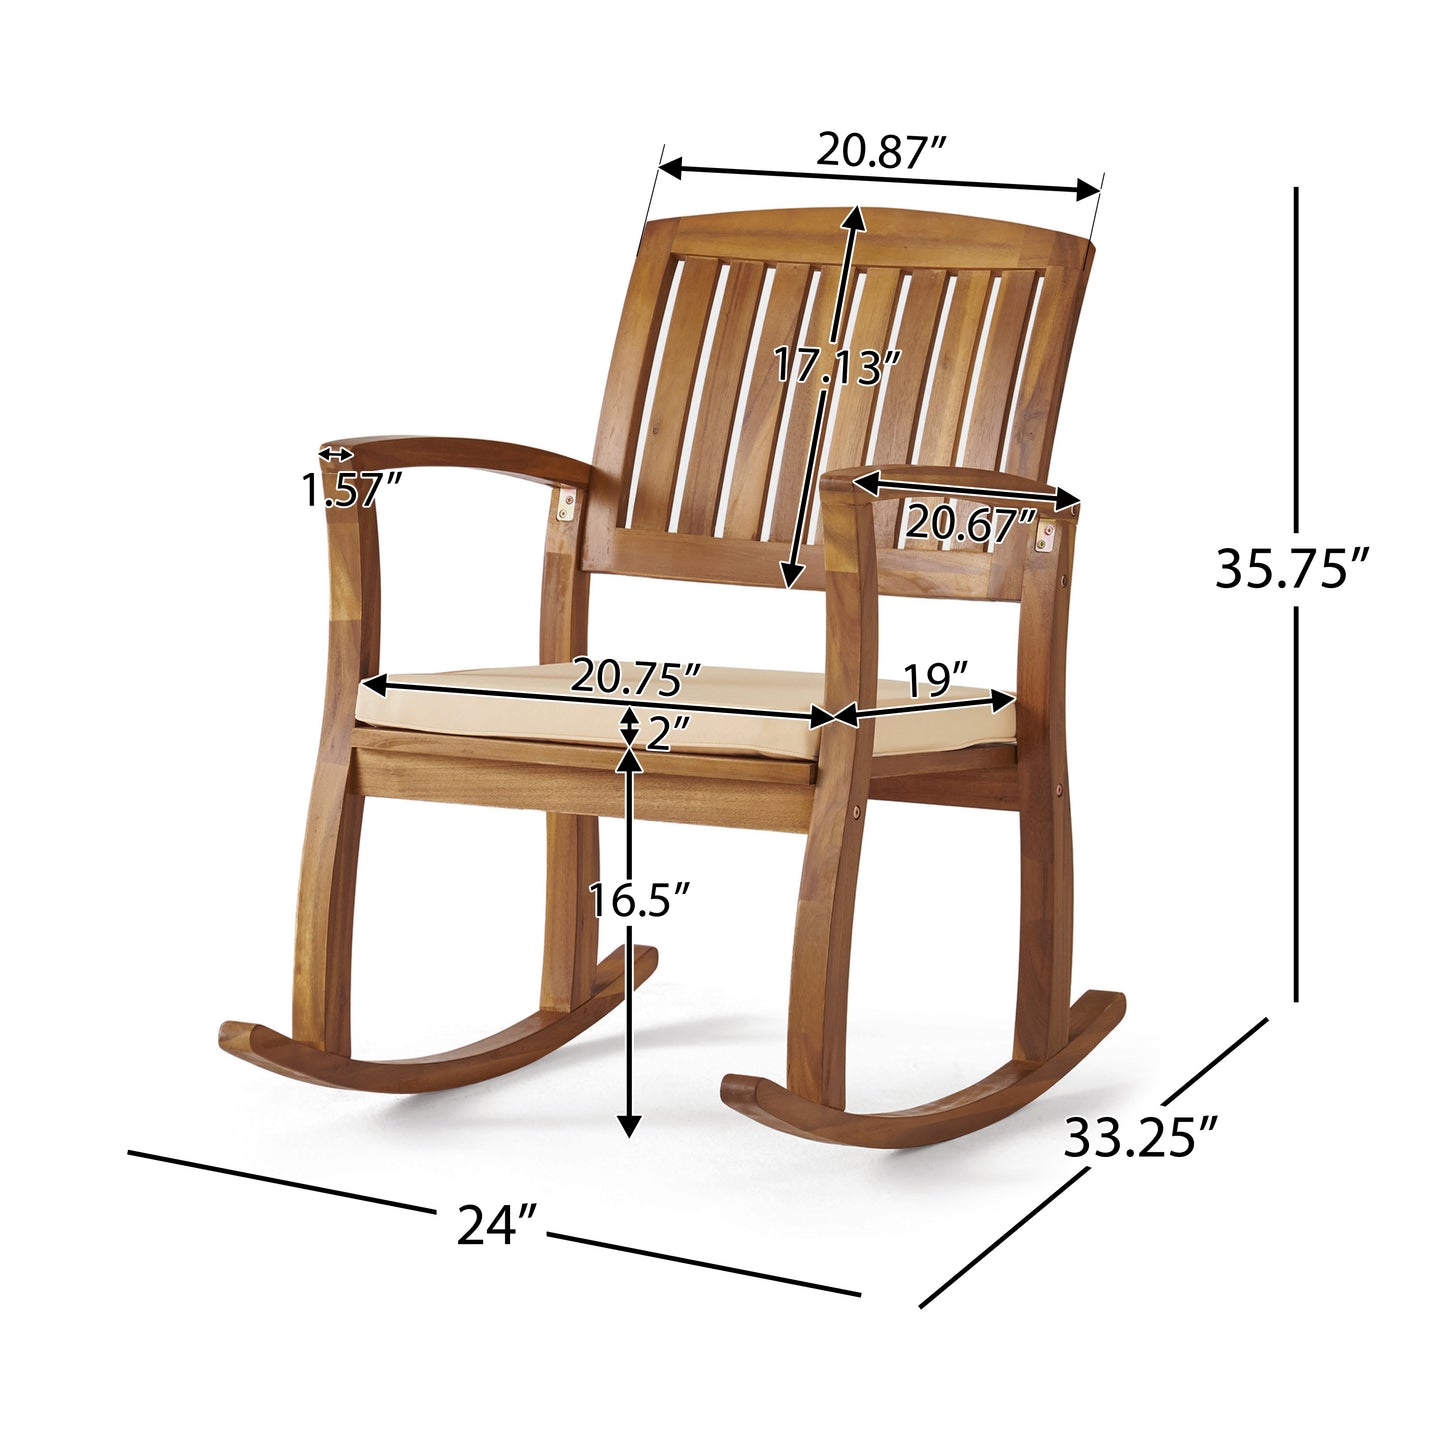 Sadie Outdoor Acacia Wood Rocking Chairs with Cushion (Set of 2)